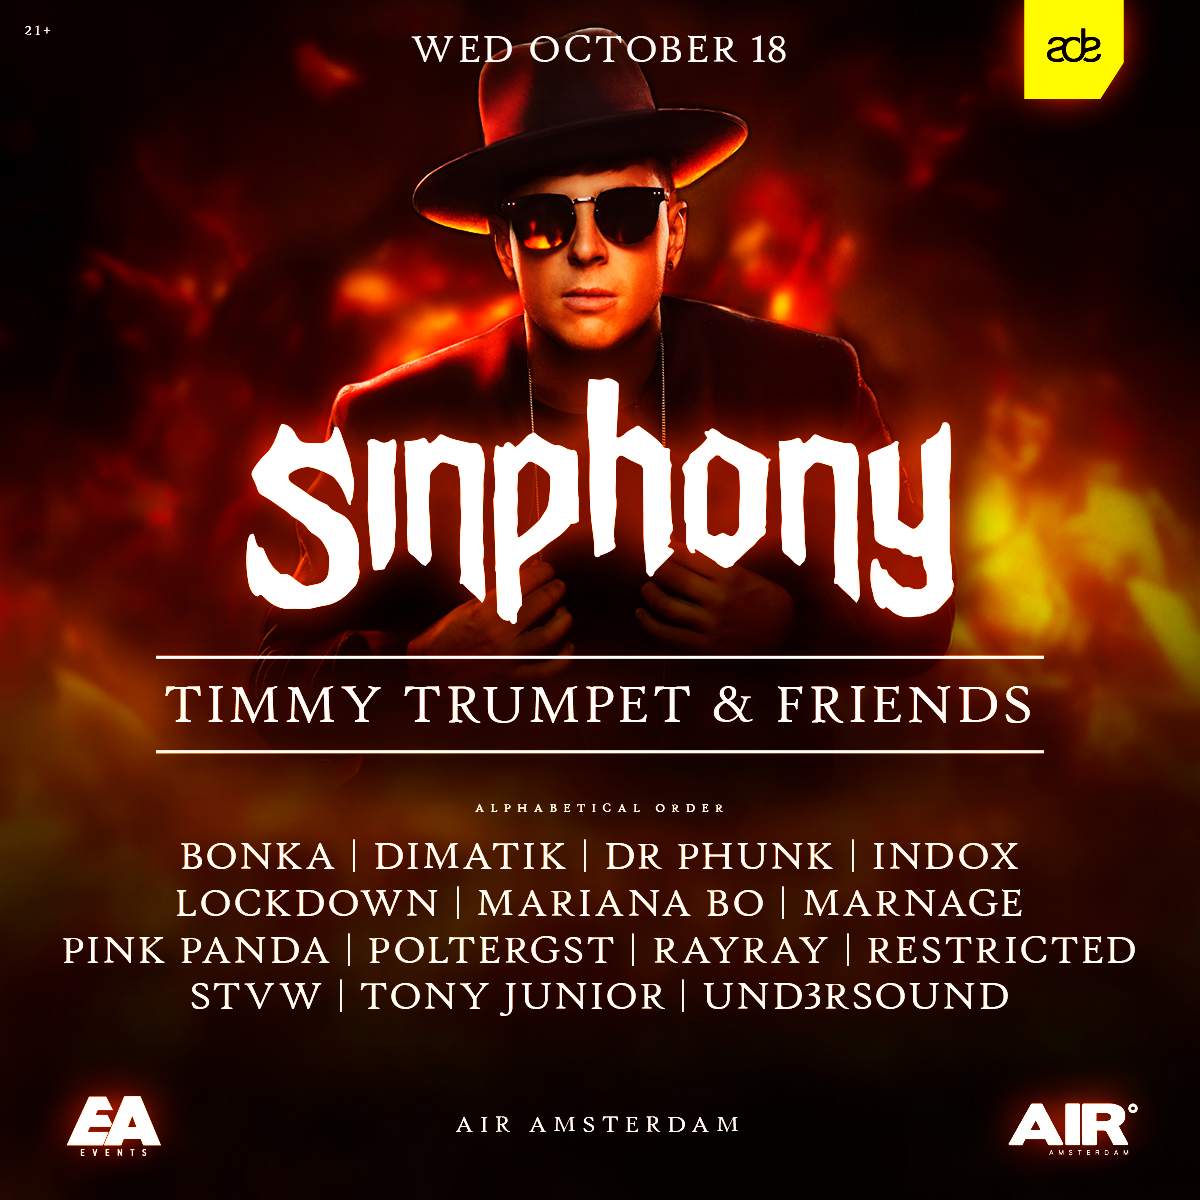 SINPHONY ADE Label Night with Timmy Trumpet & Friends - Página frontal